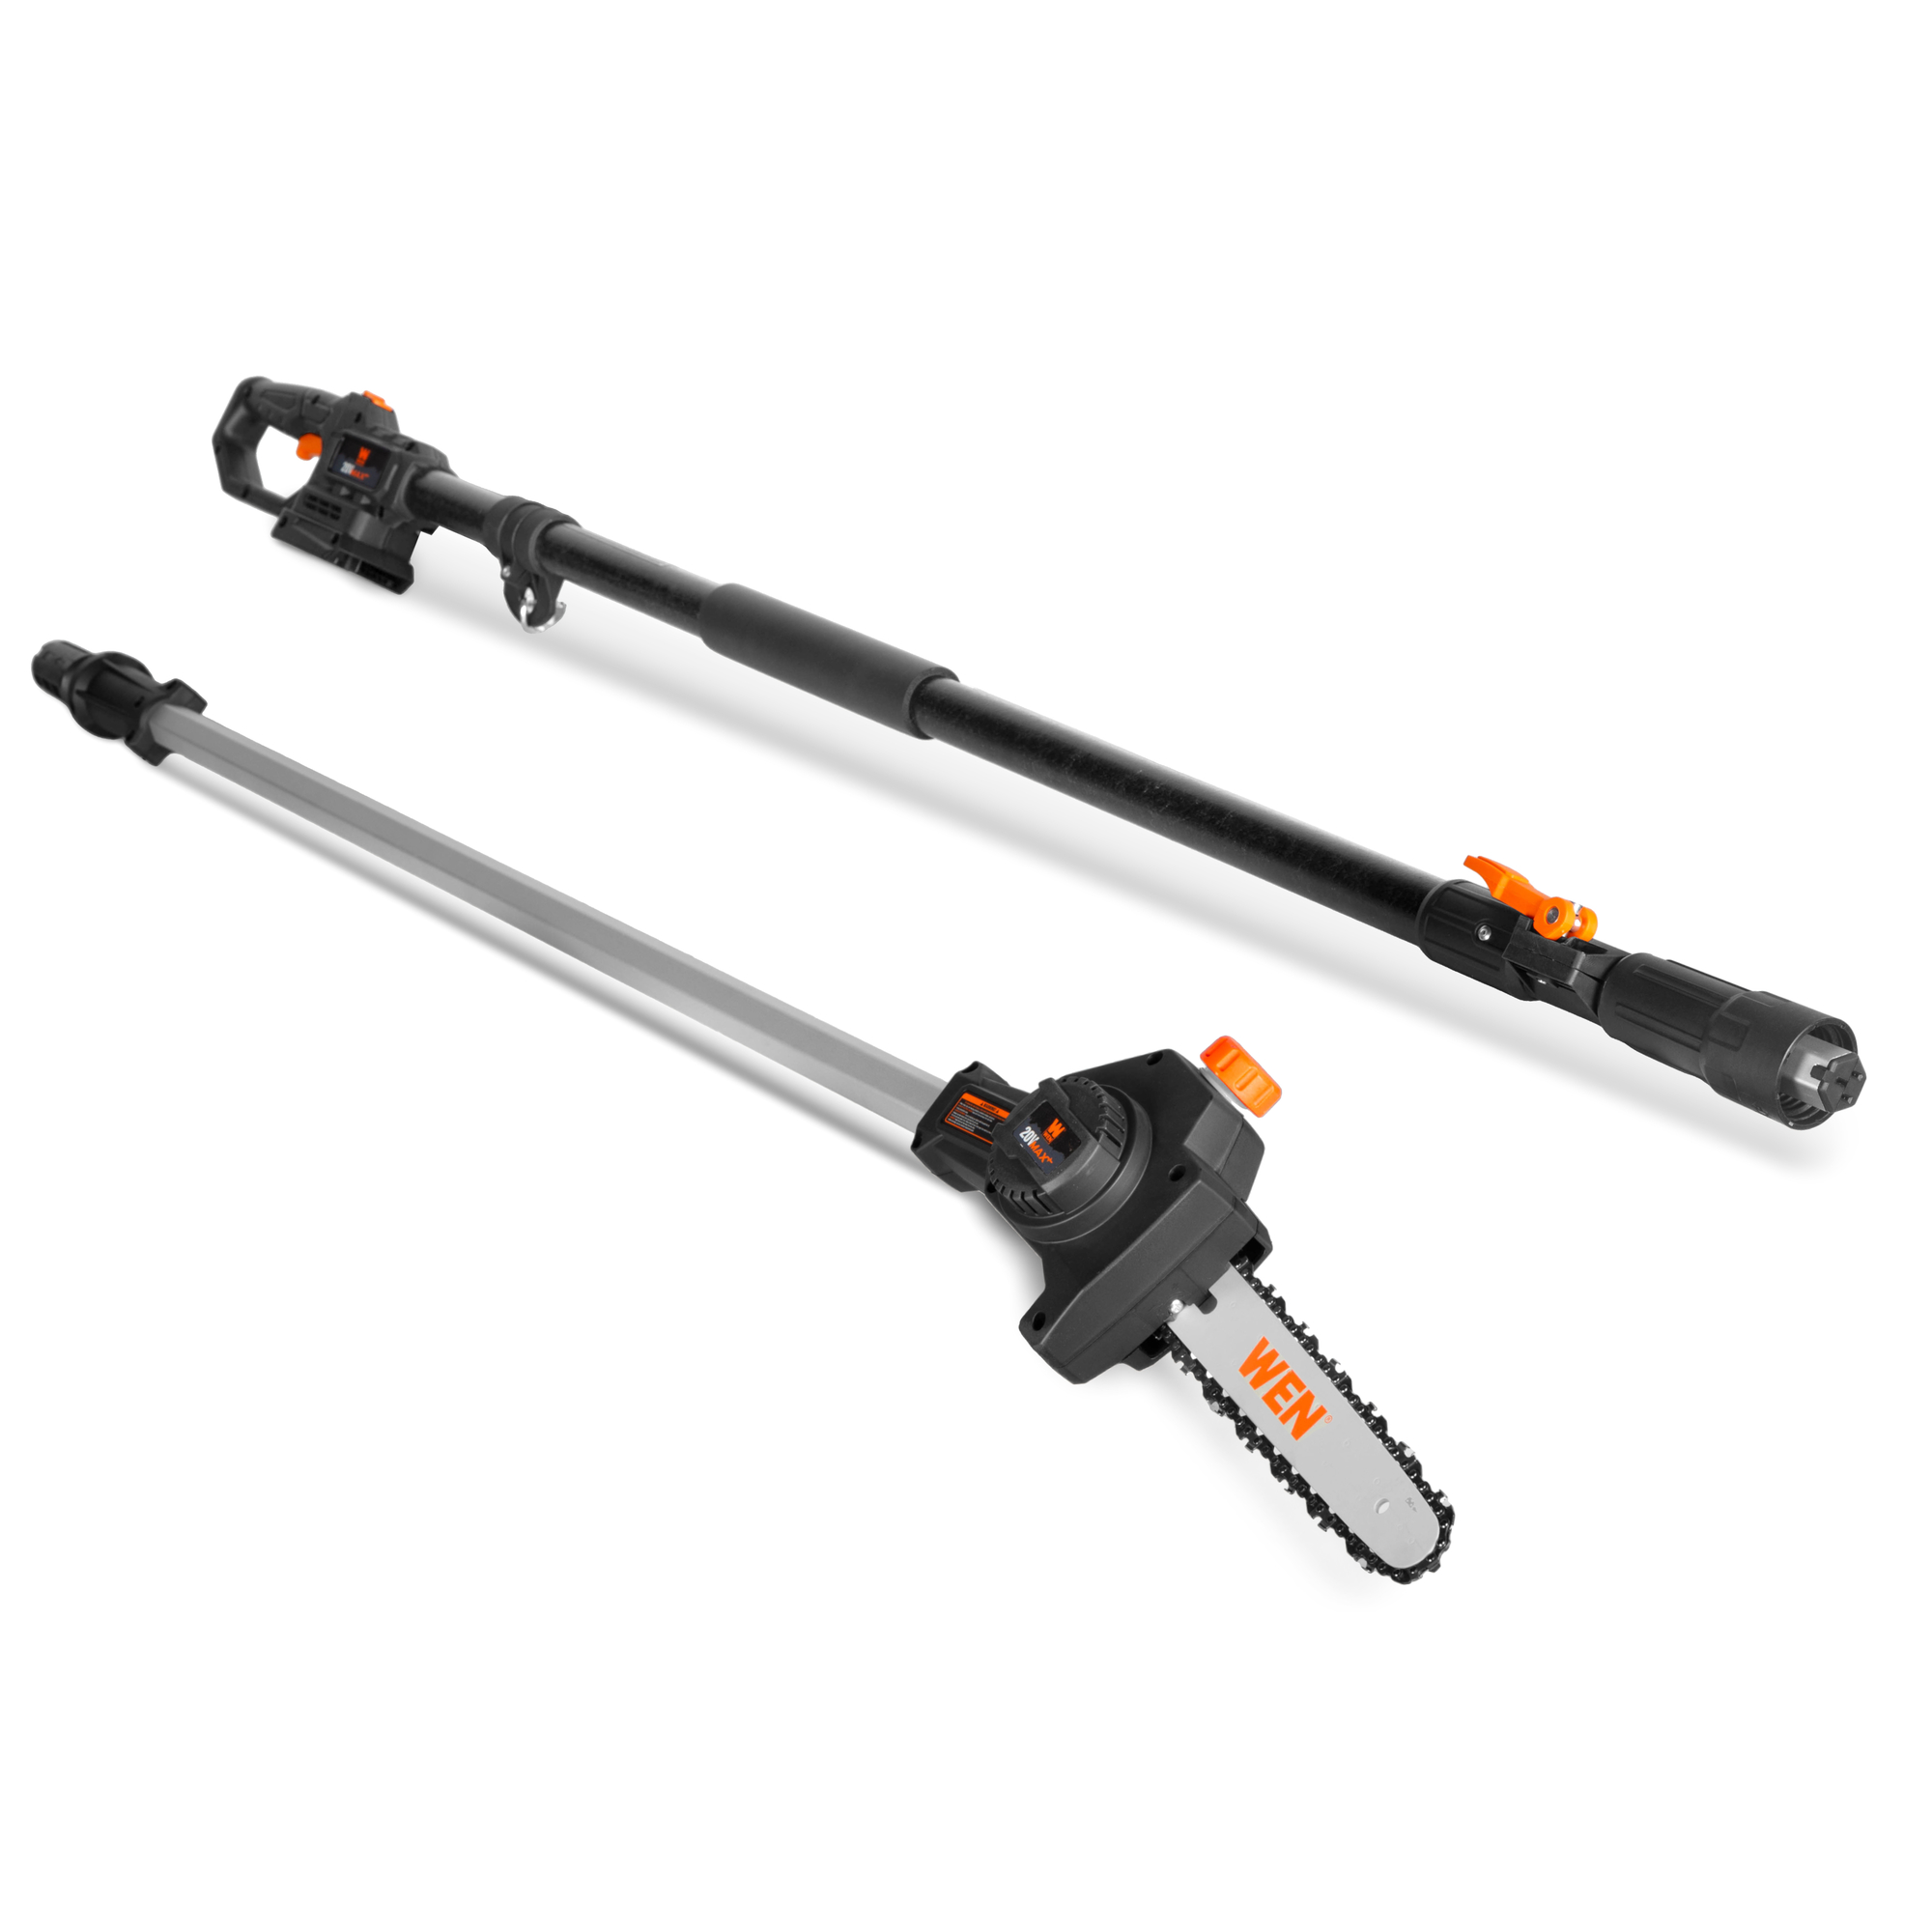 WEN, 20V Max Cordless 8Inch Pole Saw (Tool Only), Bar Length 8 in, Operating Height 17 ft, Model 20759BT